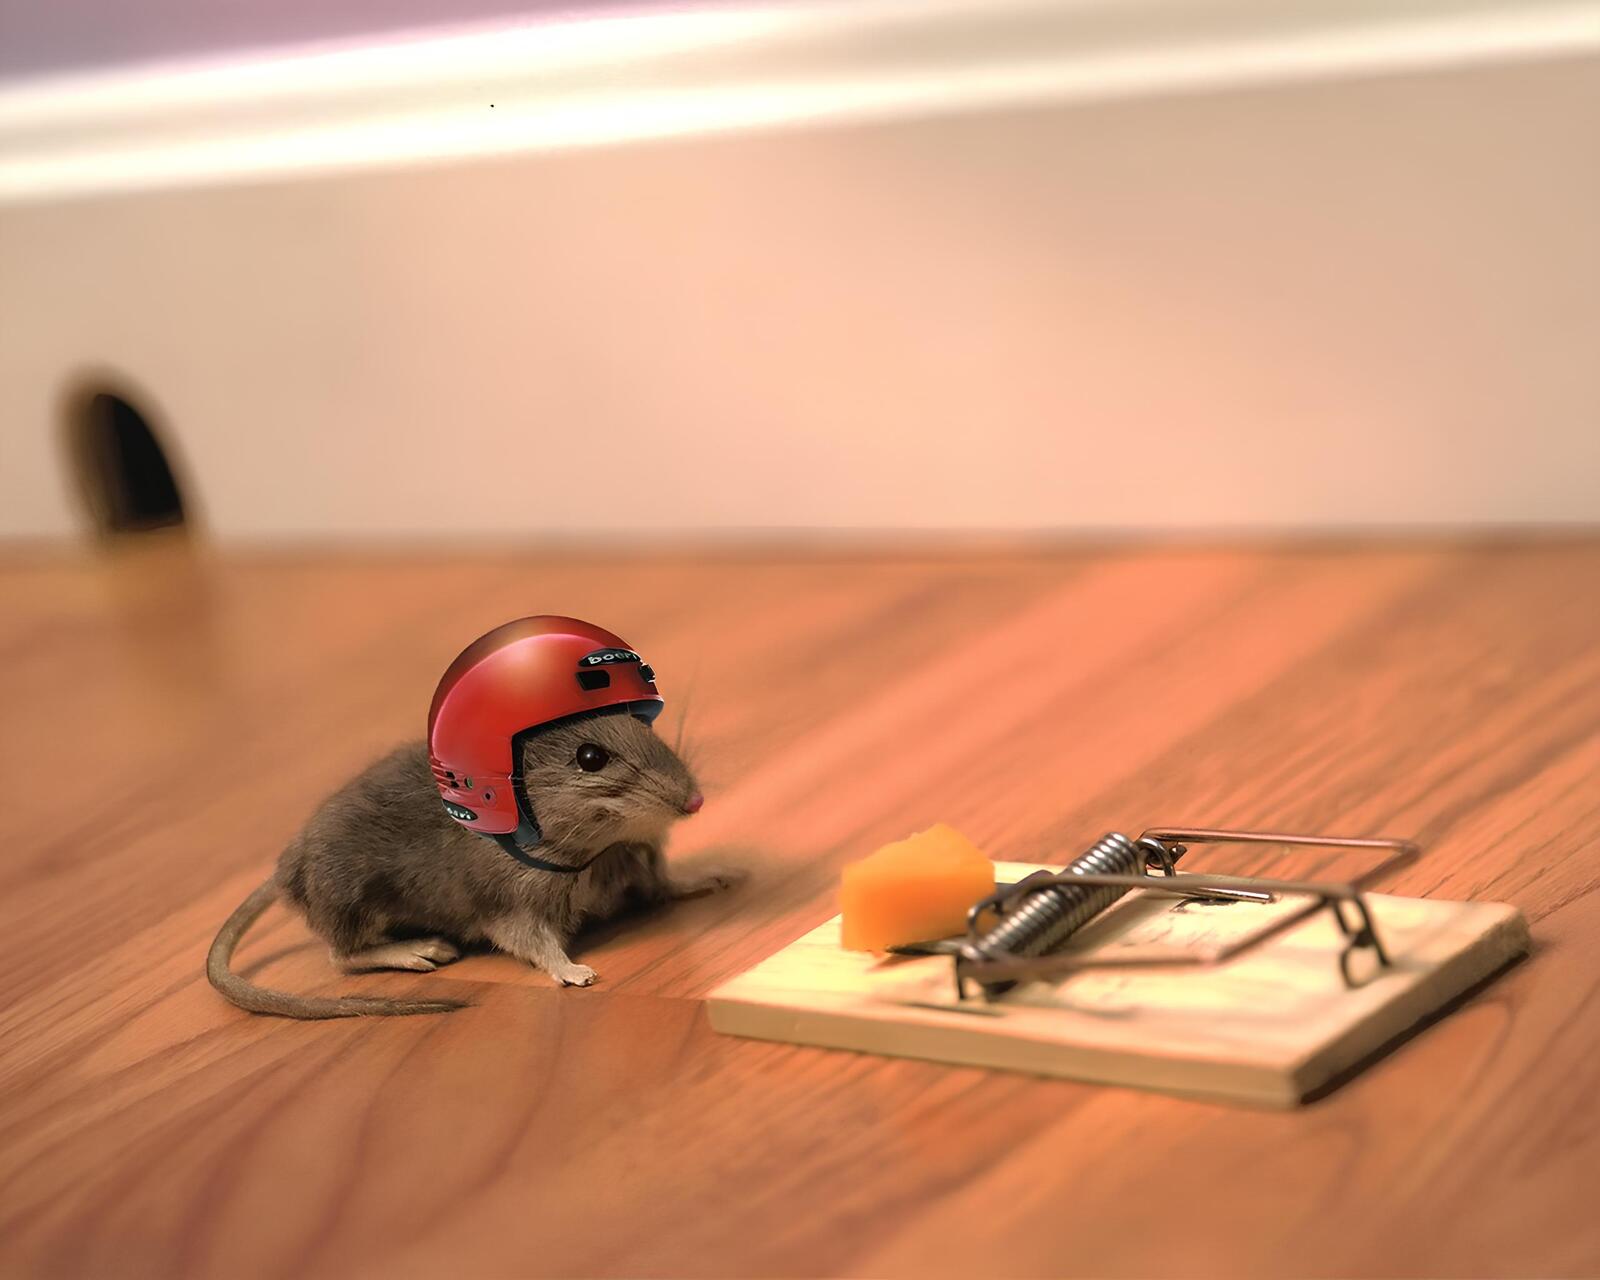 Free photo A helmeted mouse pulls cheese from a mousetrap.